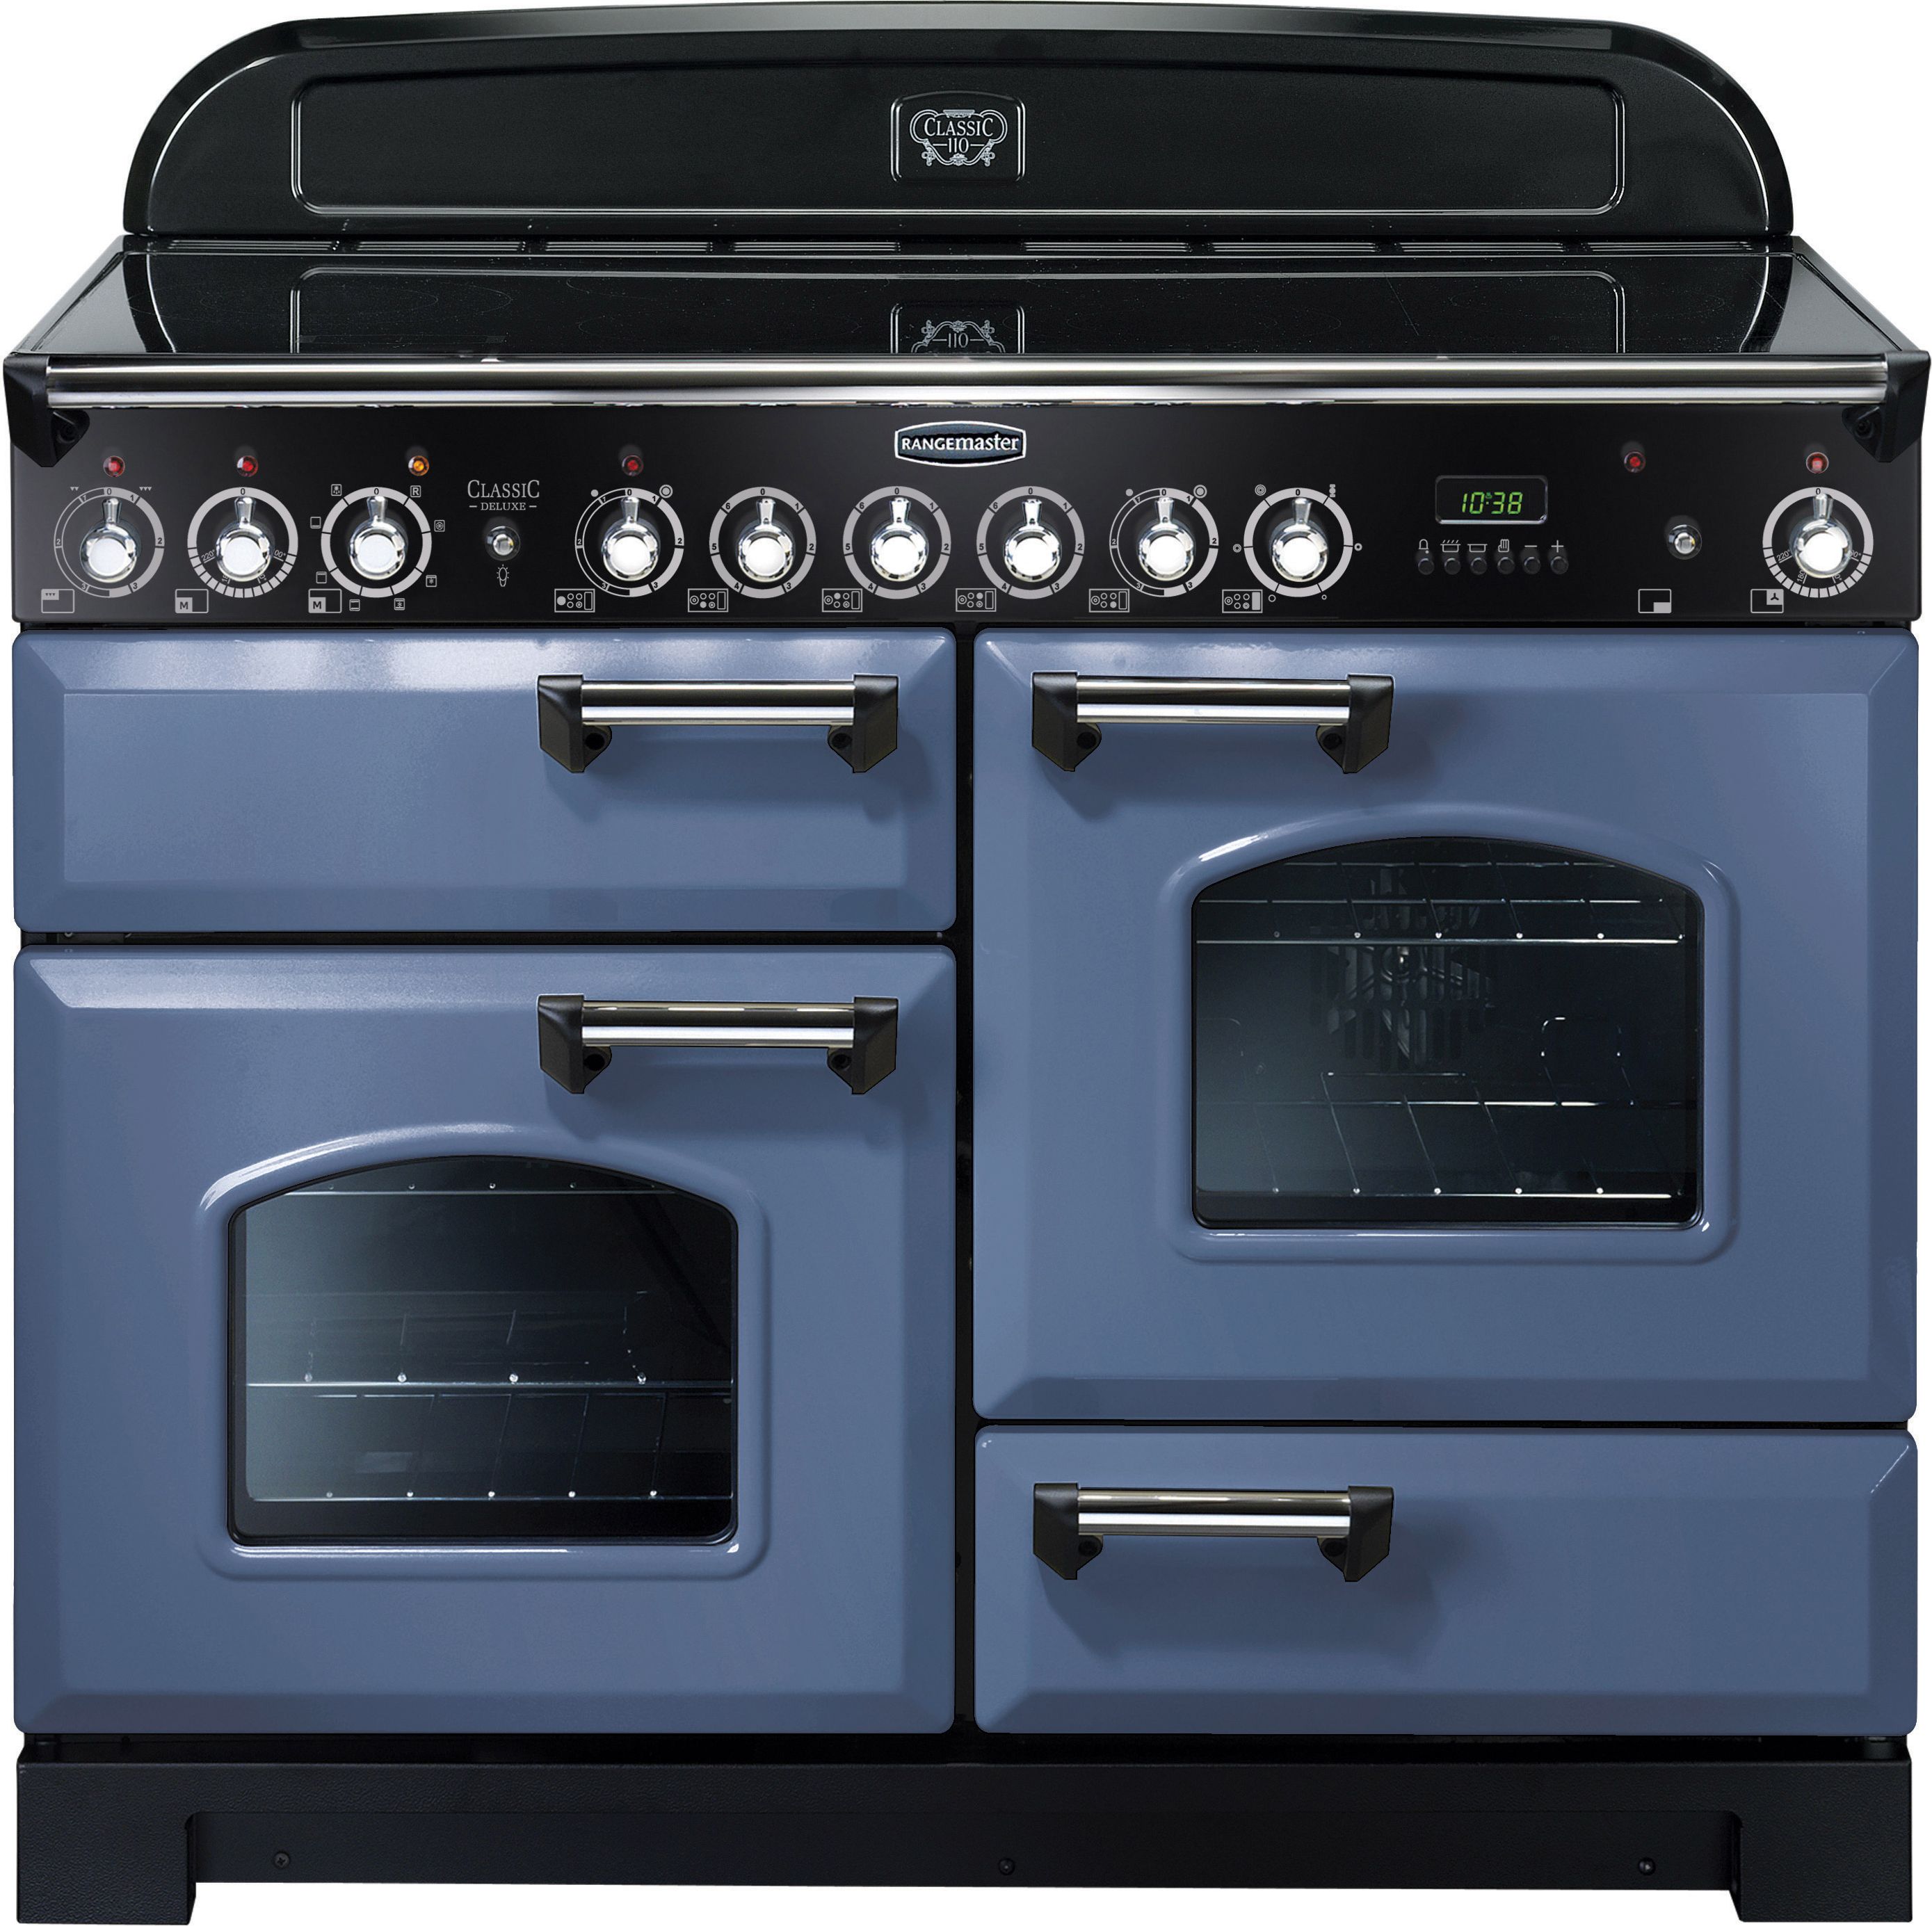 Rangemaster Classic Deluxe CDL110ECSB/C 110cm Electric Range Cooker with Ceramic Hob - Stone Blue / Chrome - A/A Rated, Blue